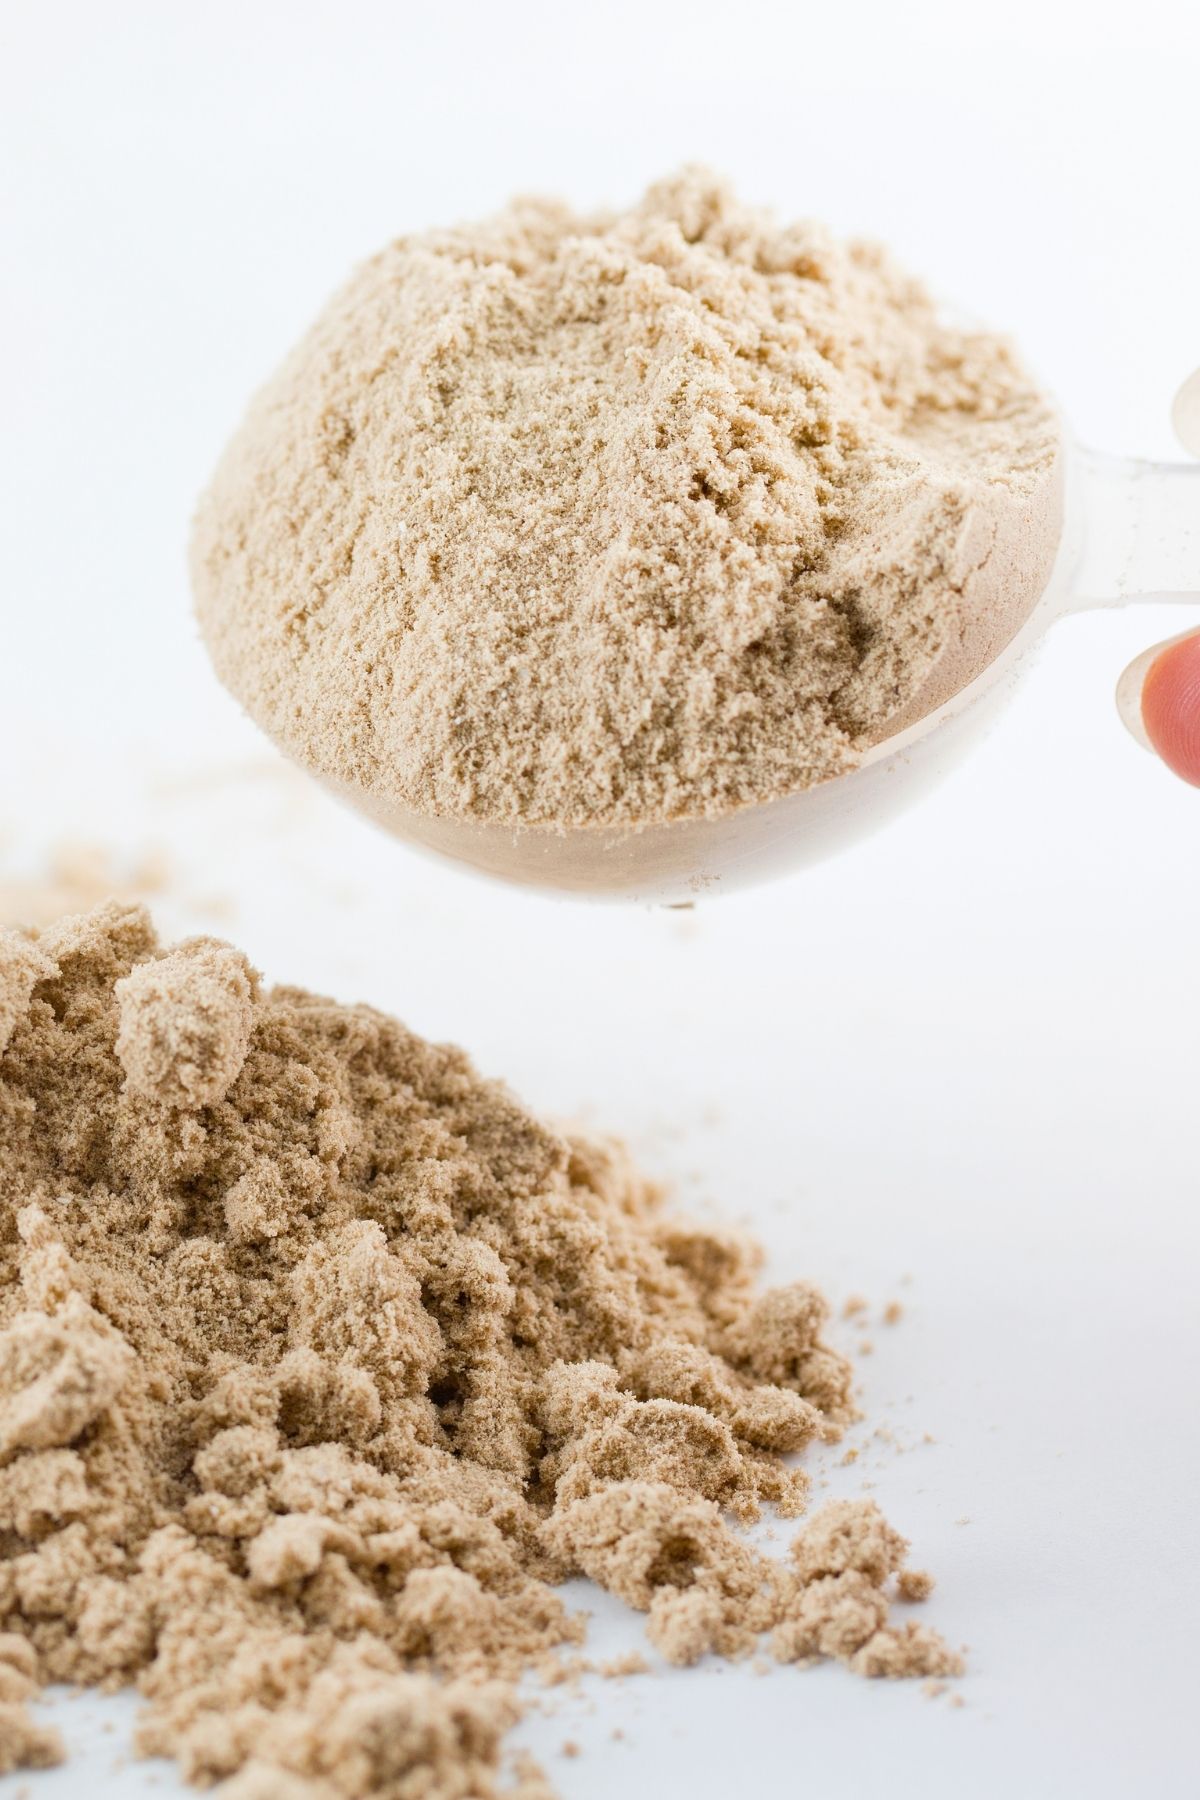 a scoop of whey protein.